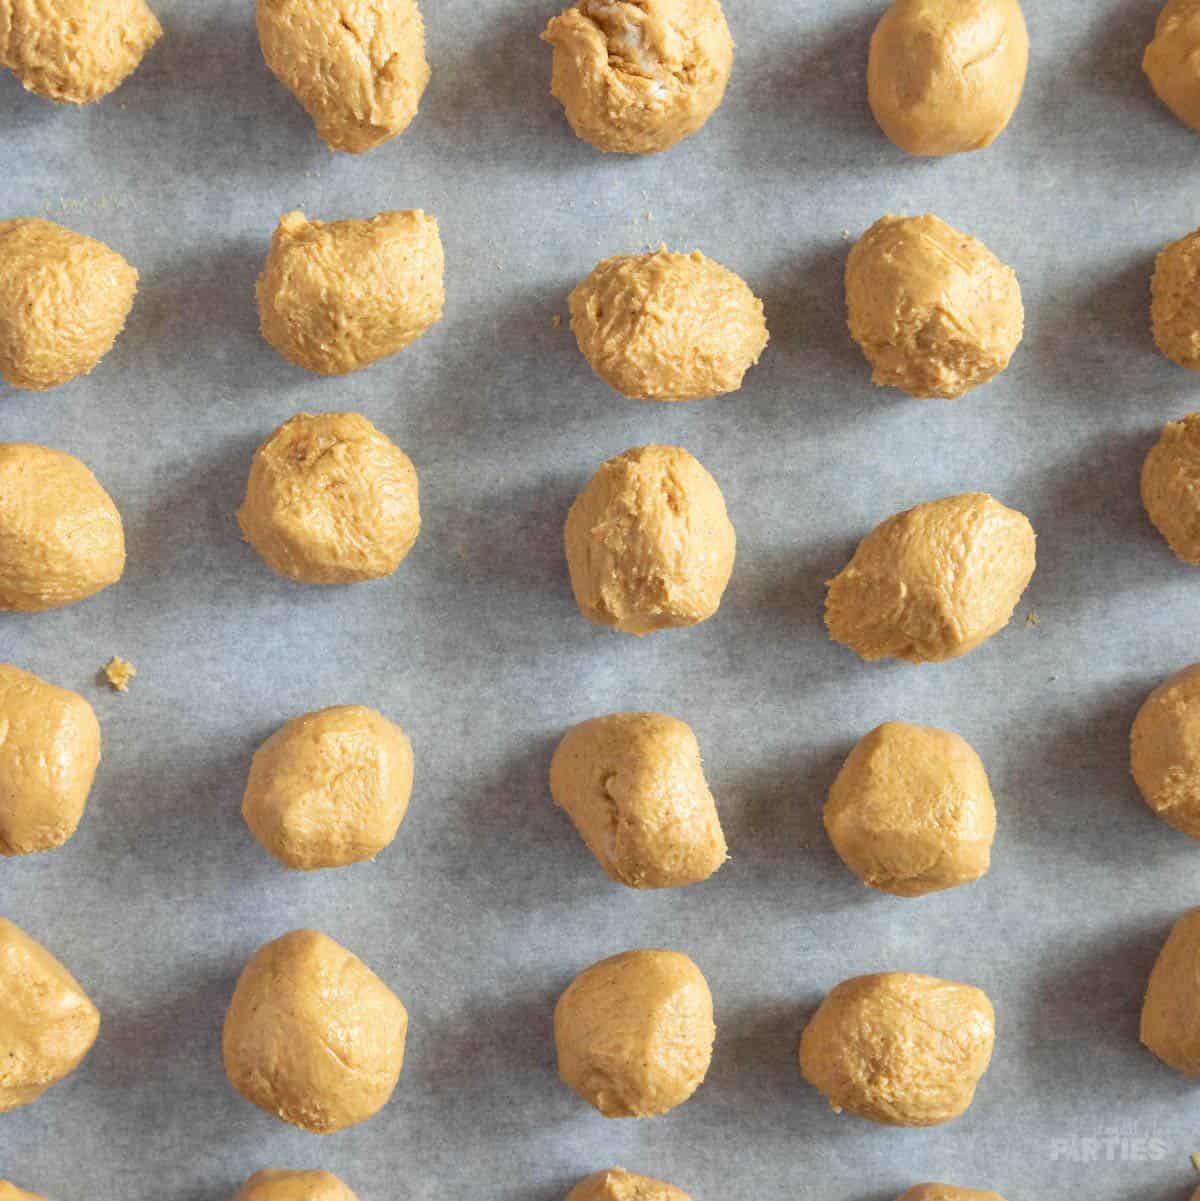 Peanut butter balls on a parchment covered pan.